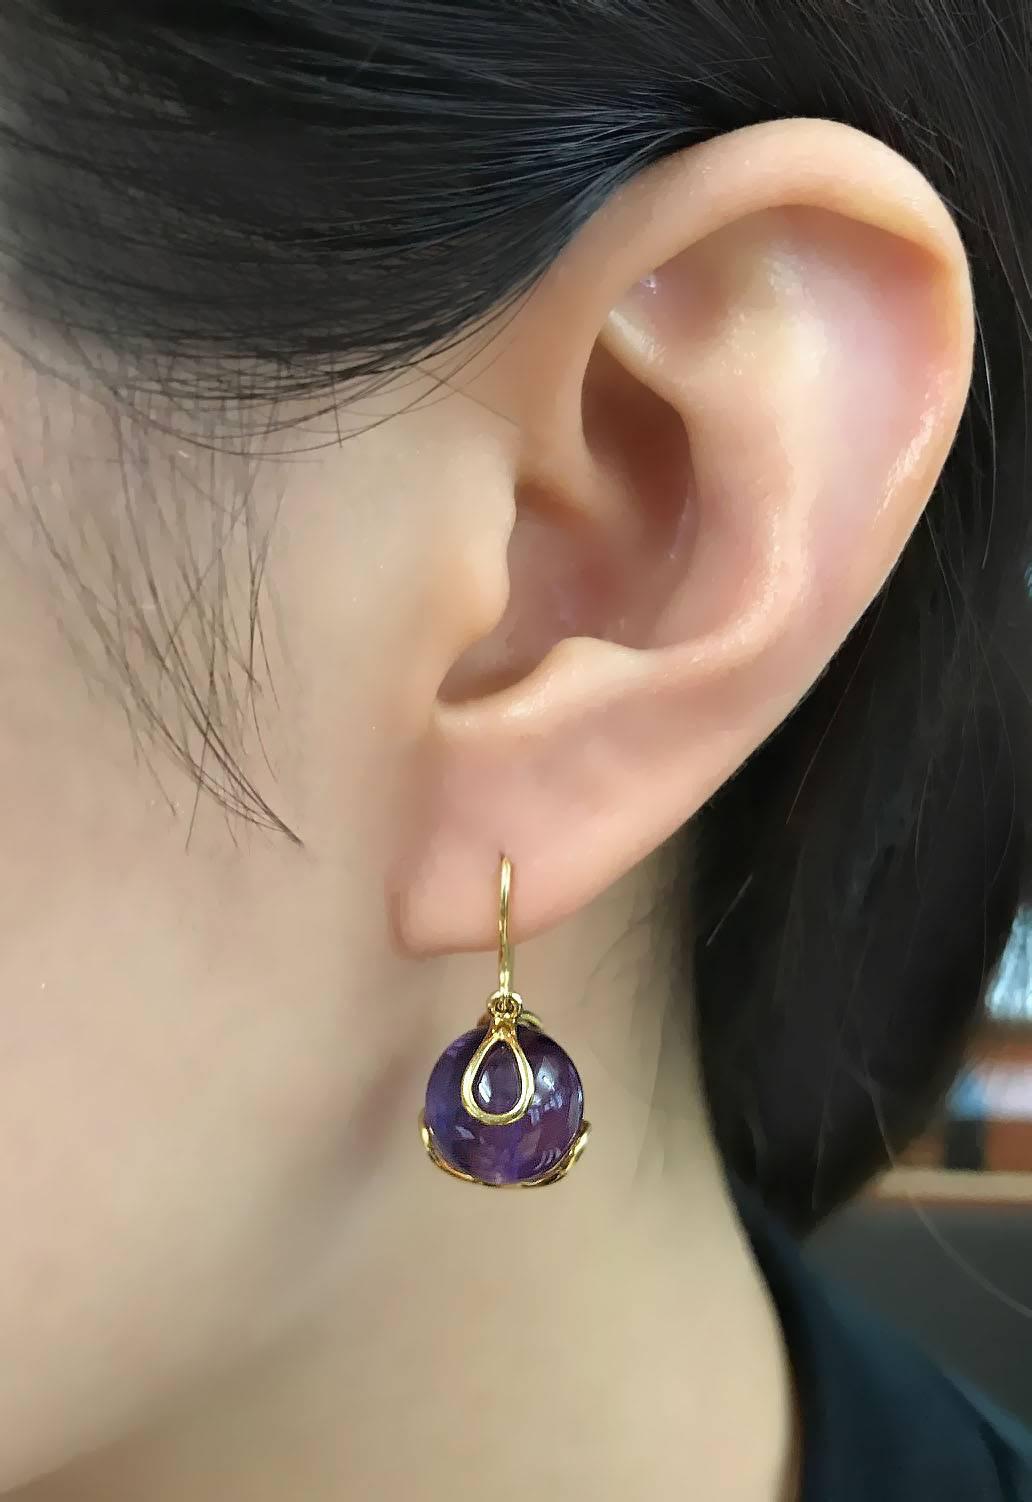 These elegant earrings are made in 18kt yellow gold, with amethyst balls drop and French wires. Iconic